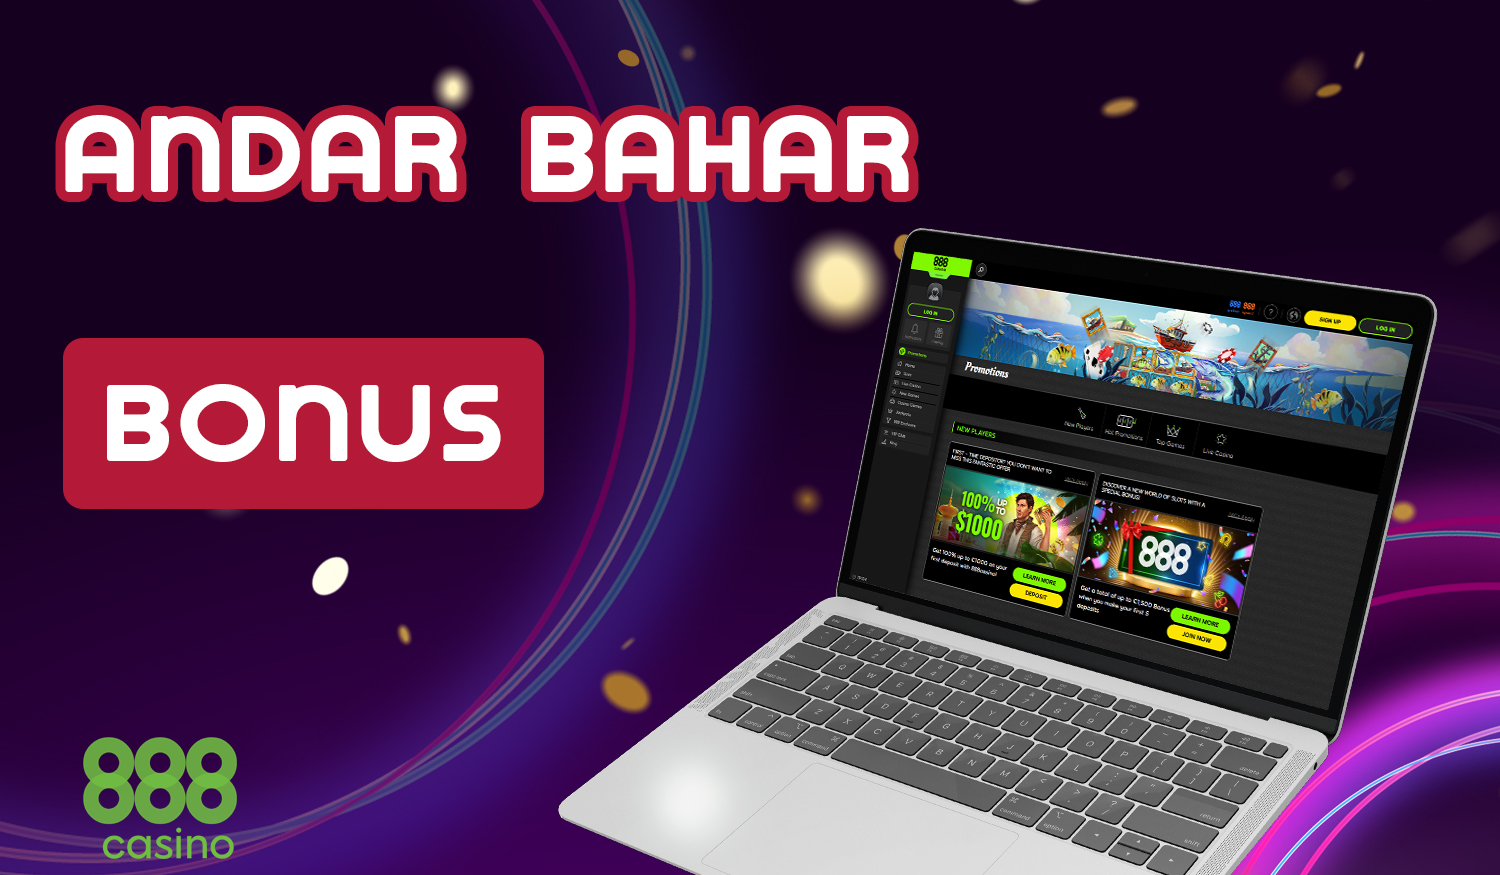 List of bonuses available at 888 casino for Indian users